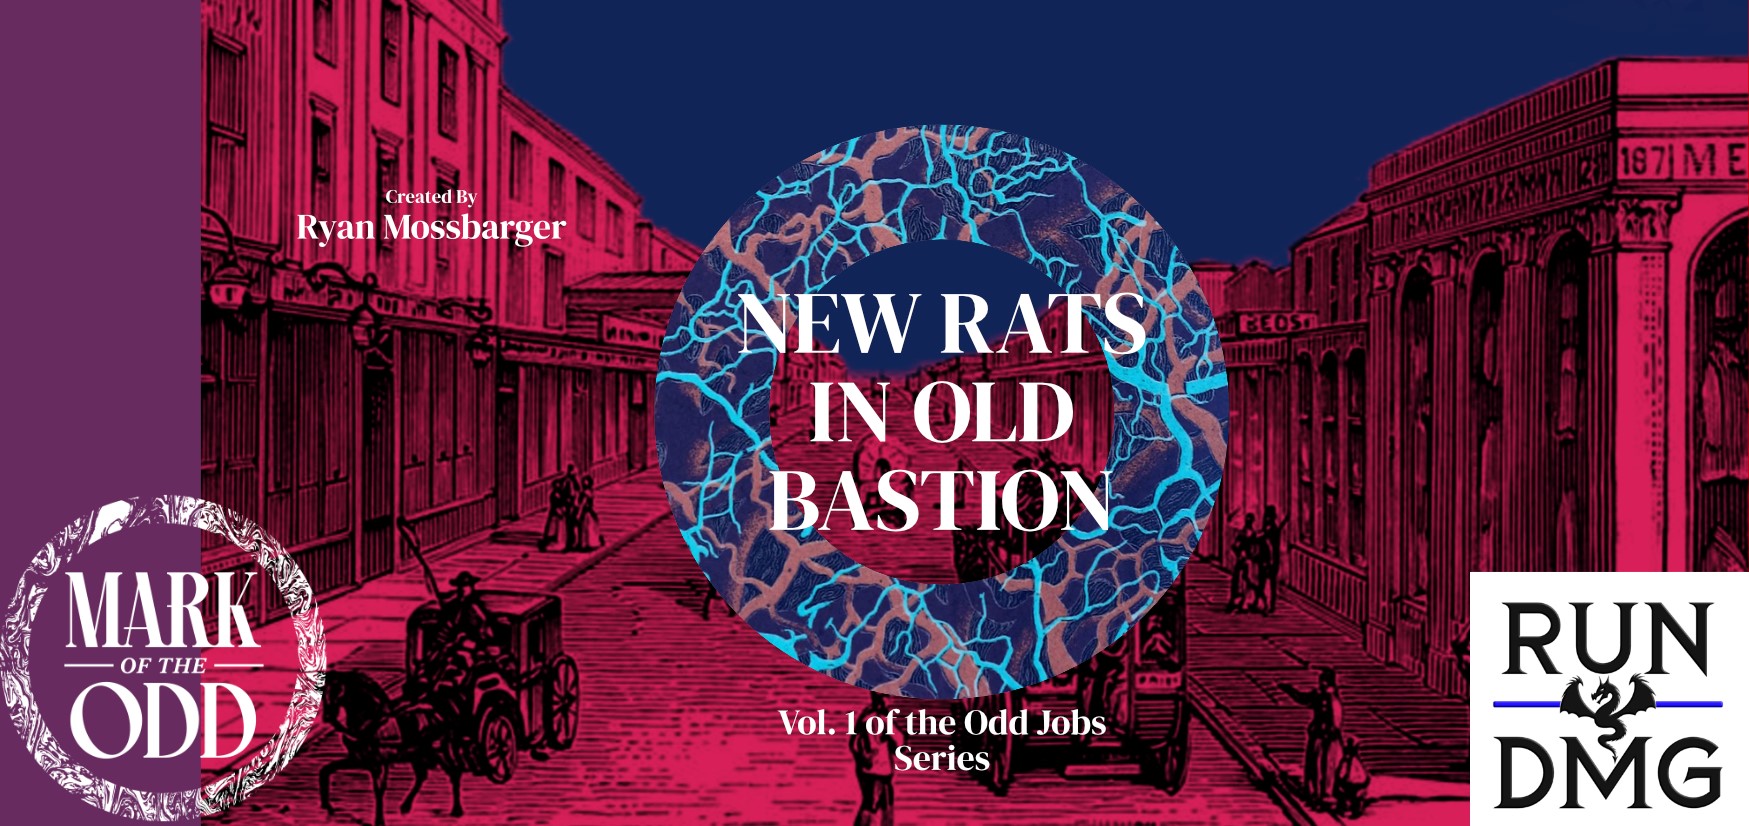 New Rats In Old Bastion